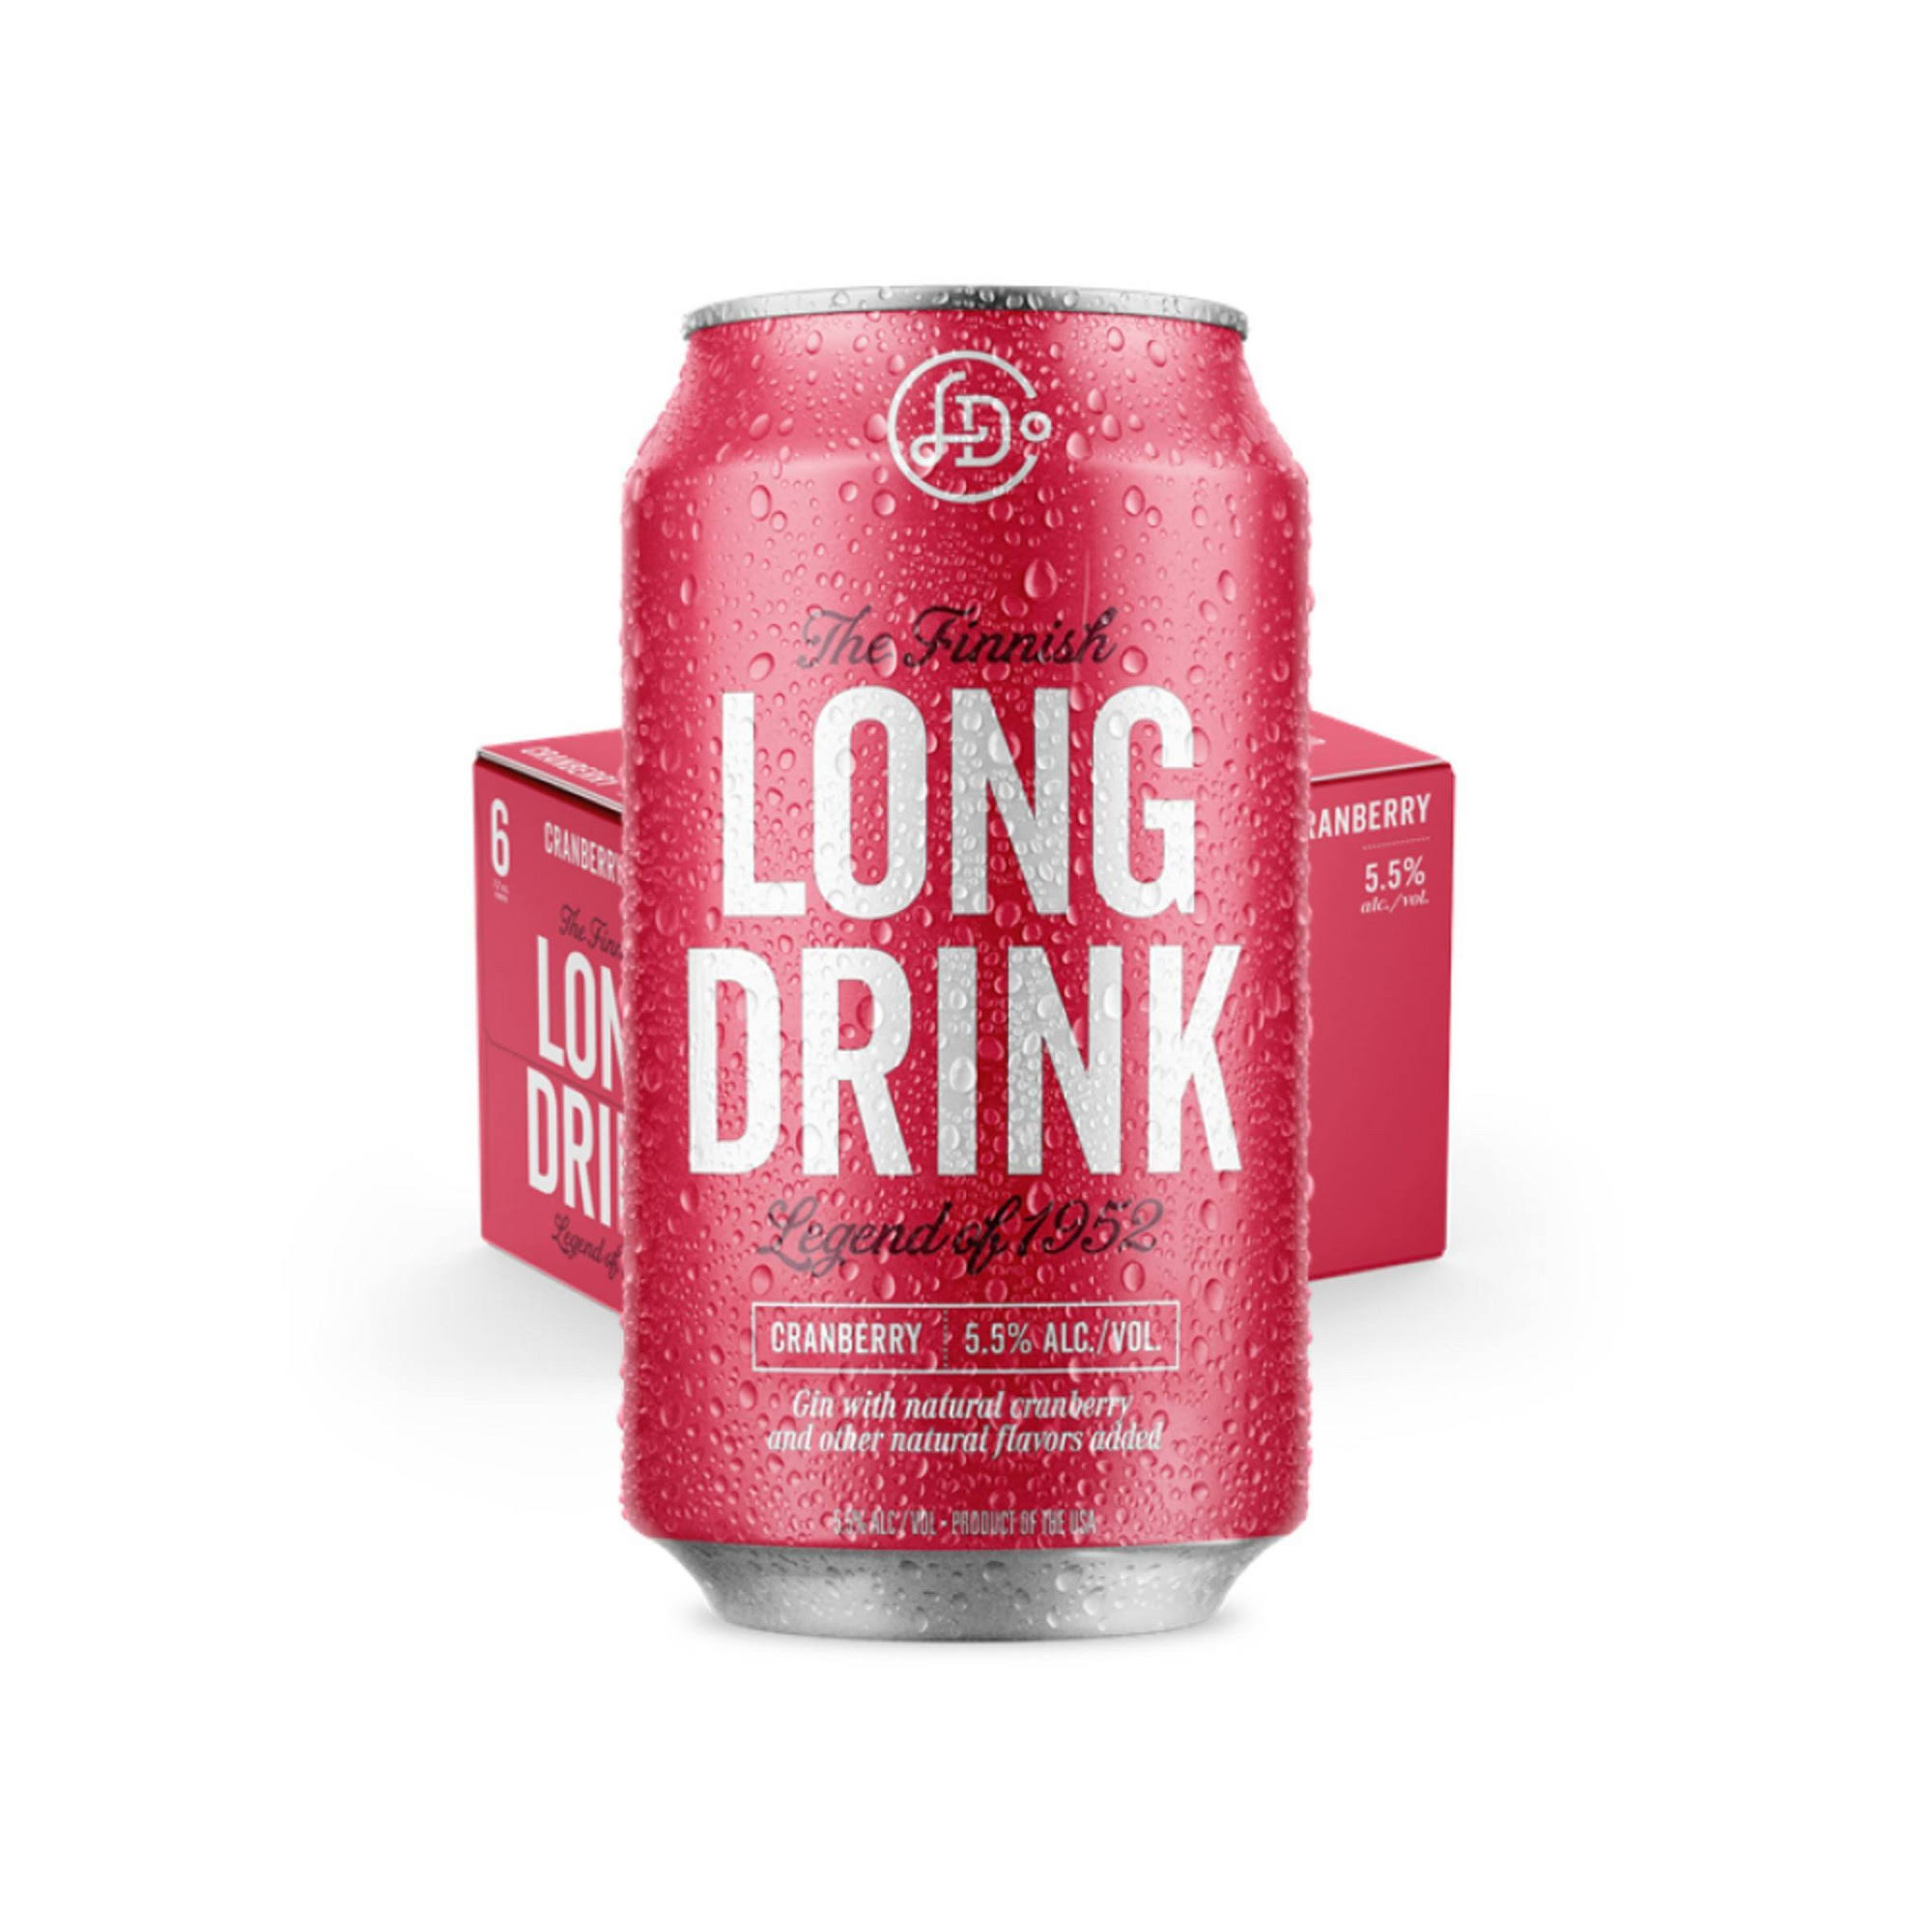 Long Drink Gin Cocktail, Cranberry - 6 pack, 12 oz cans